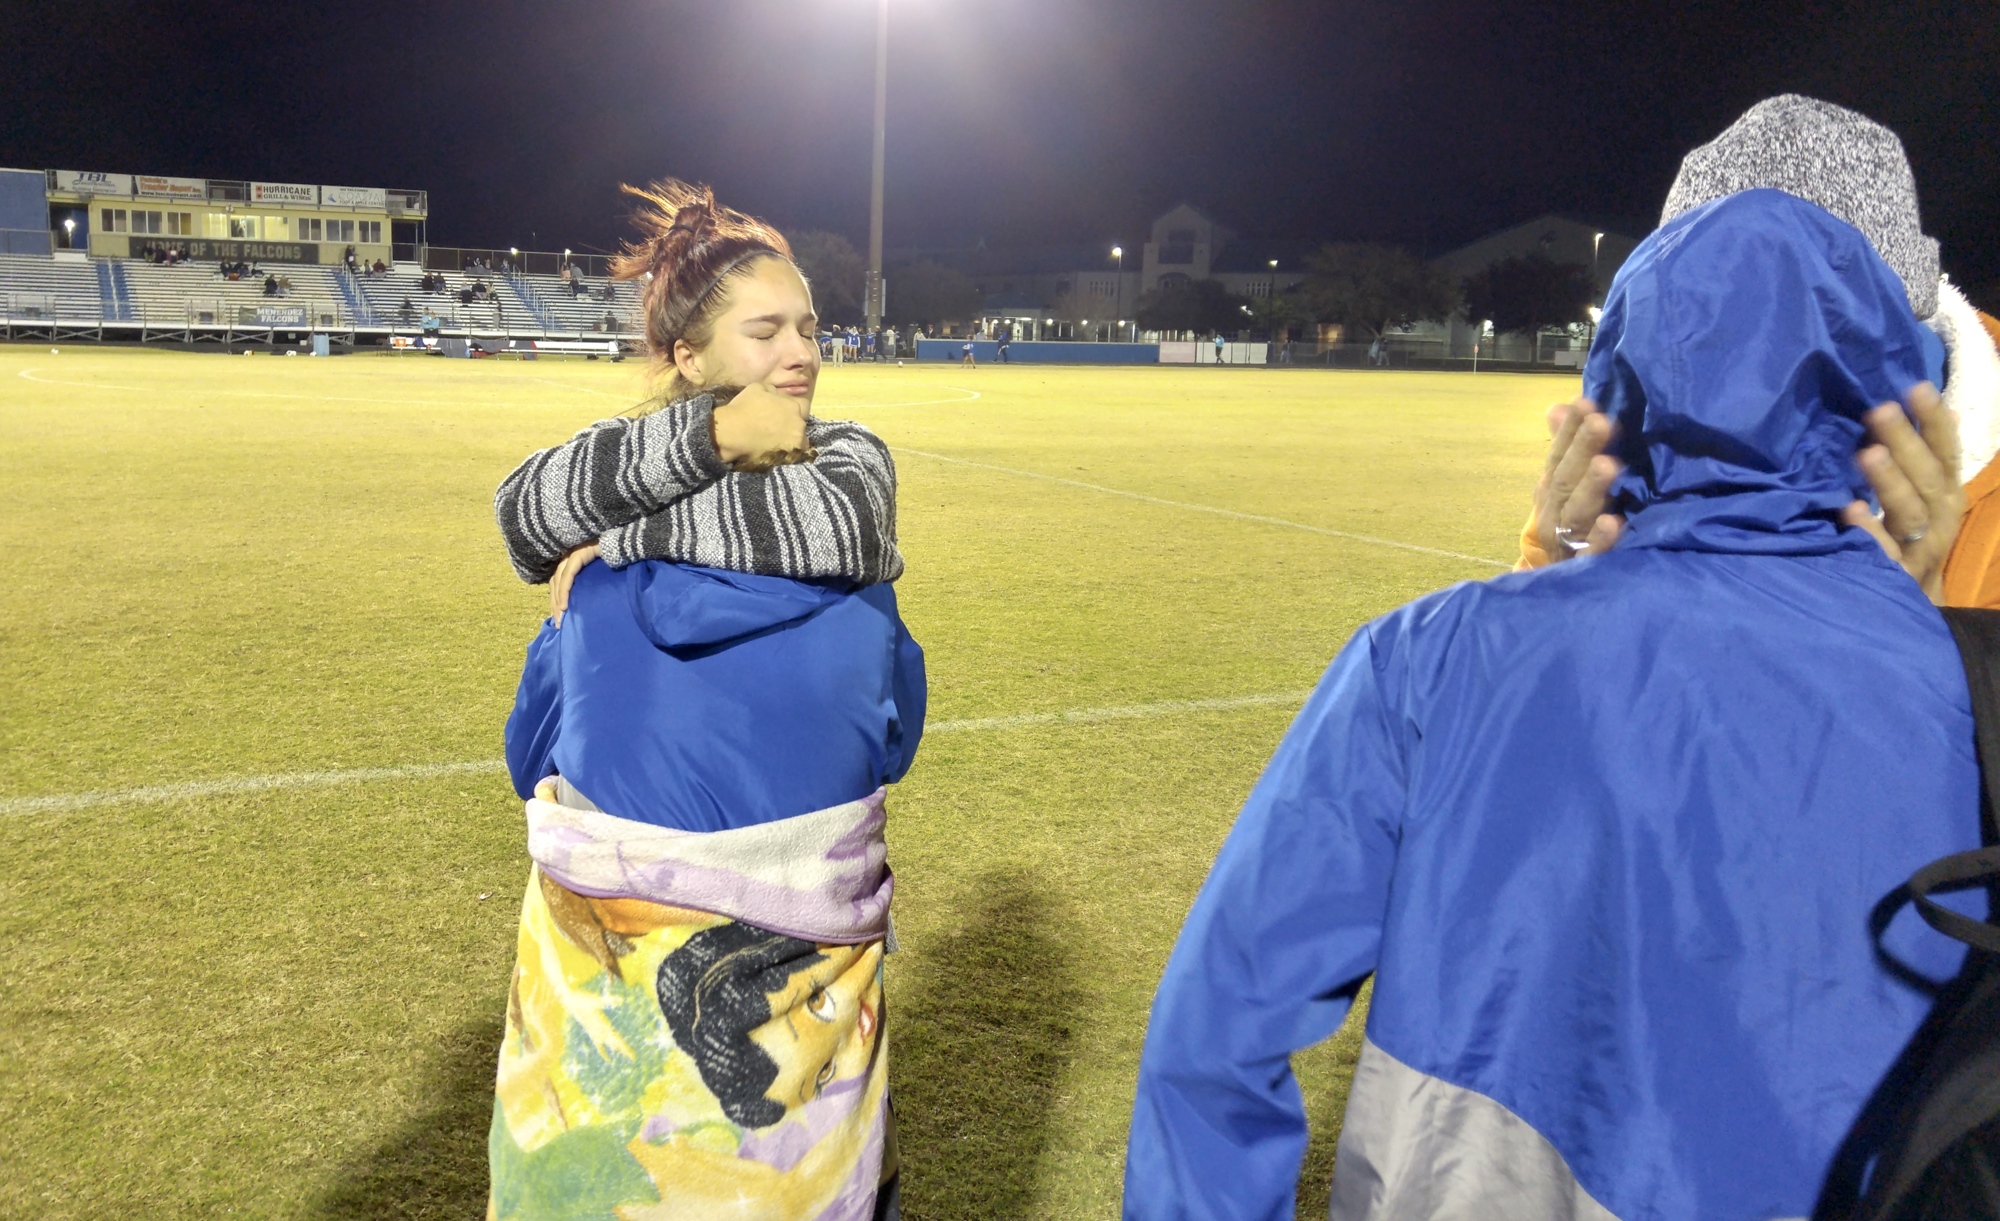 Fatima Barham hugs one of her teammates after the game. Photo by Brent Woronoff